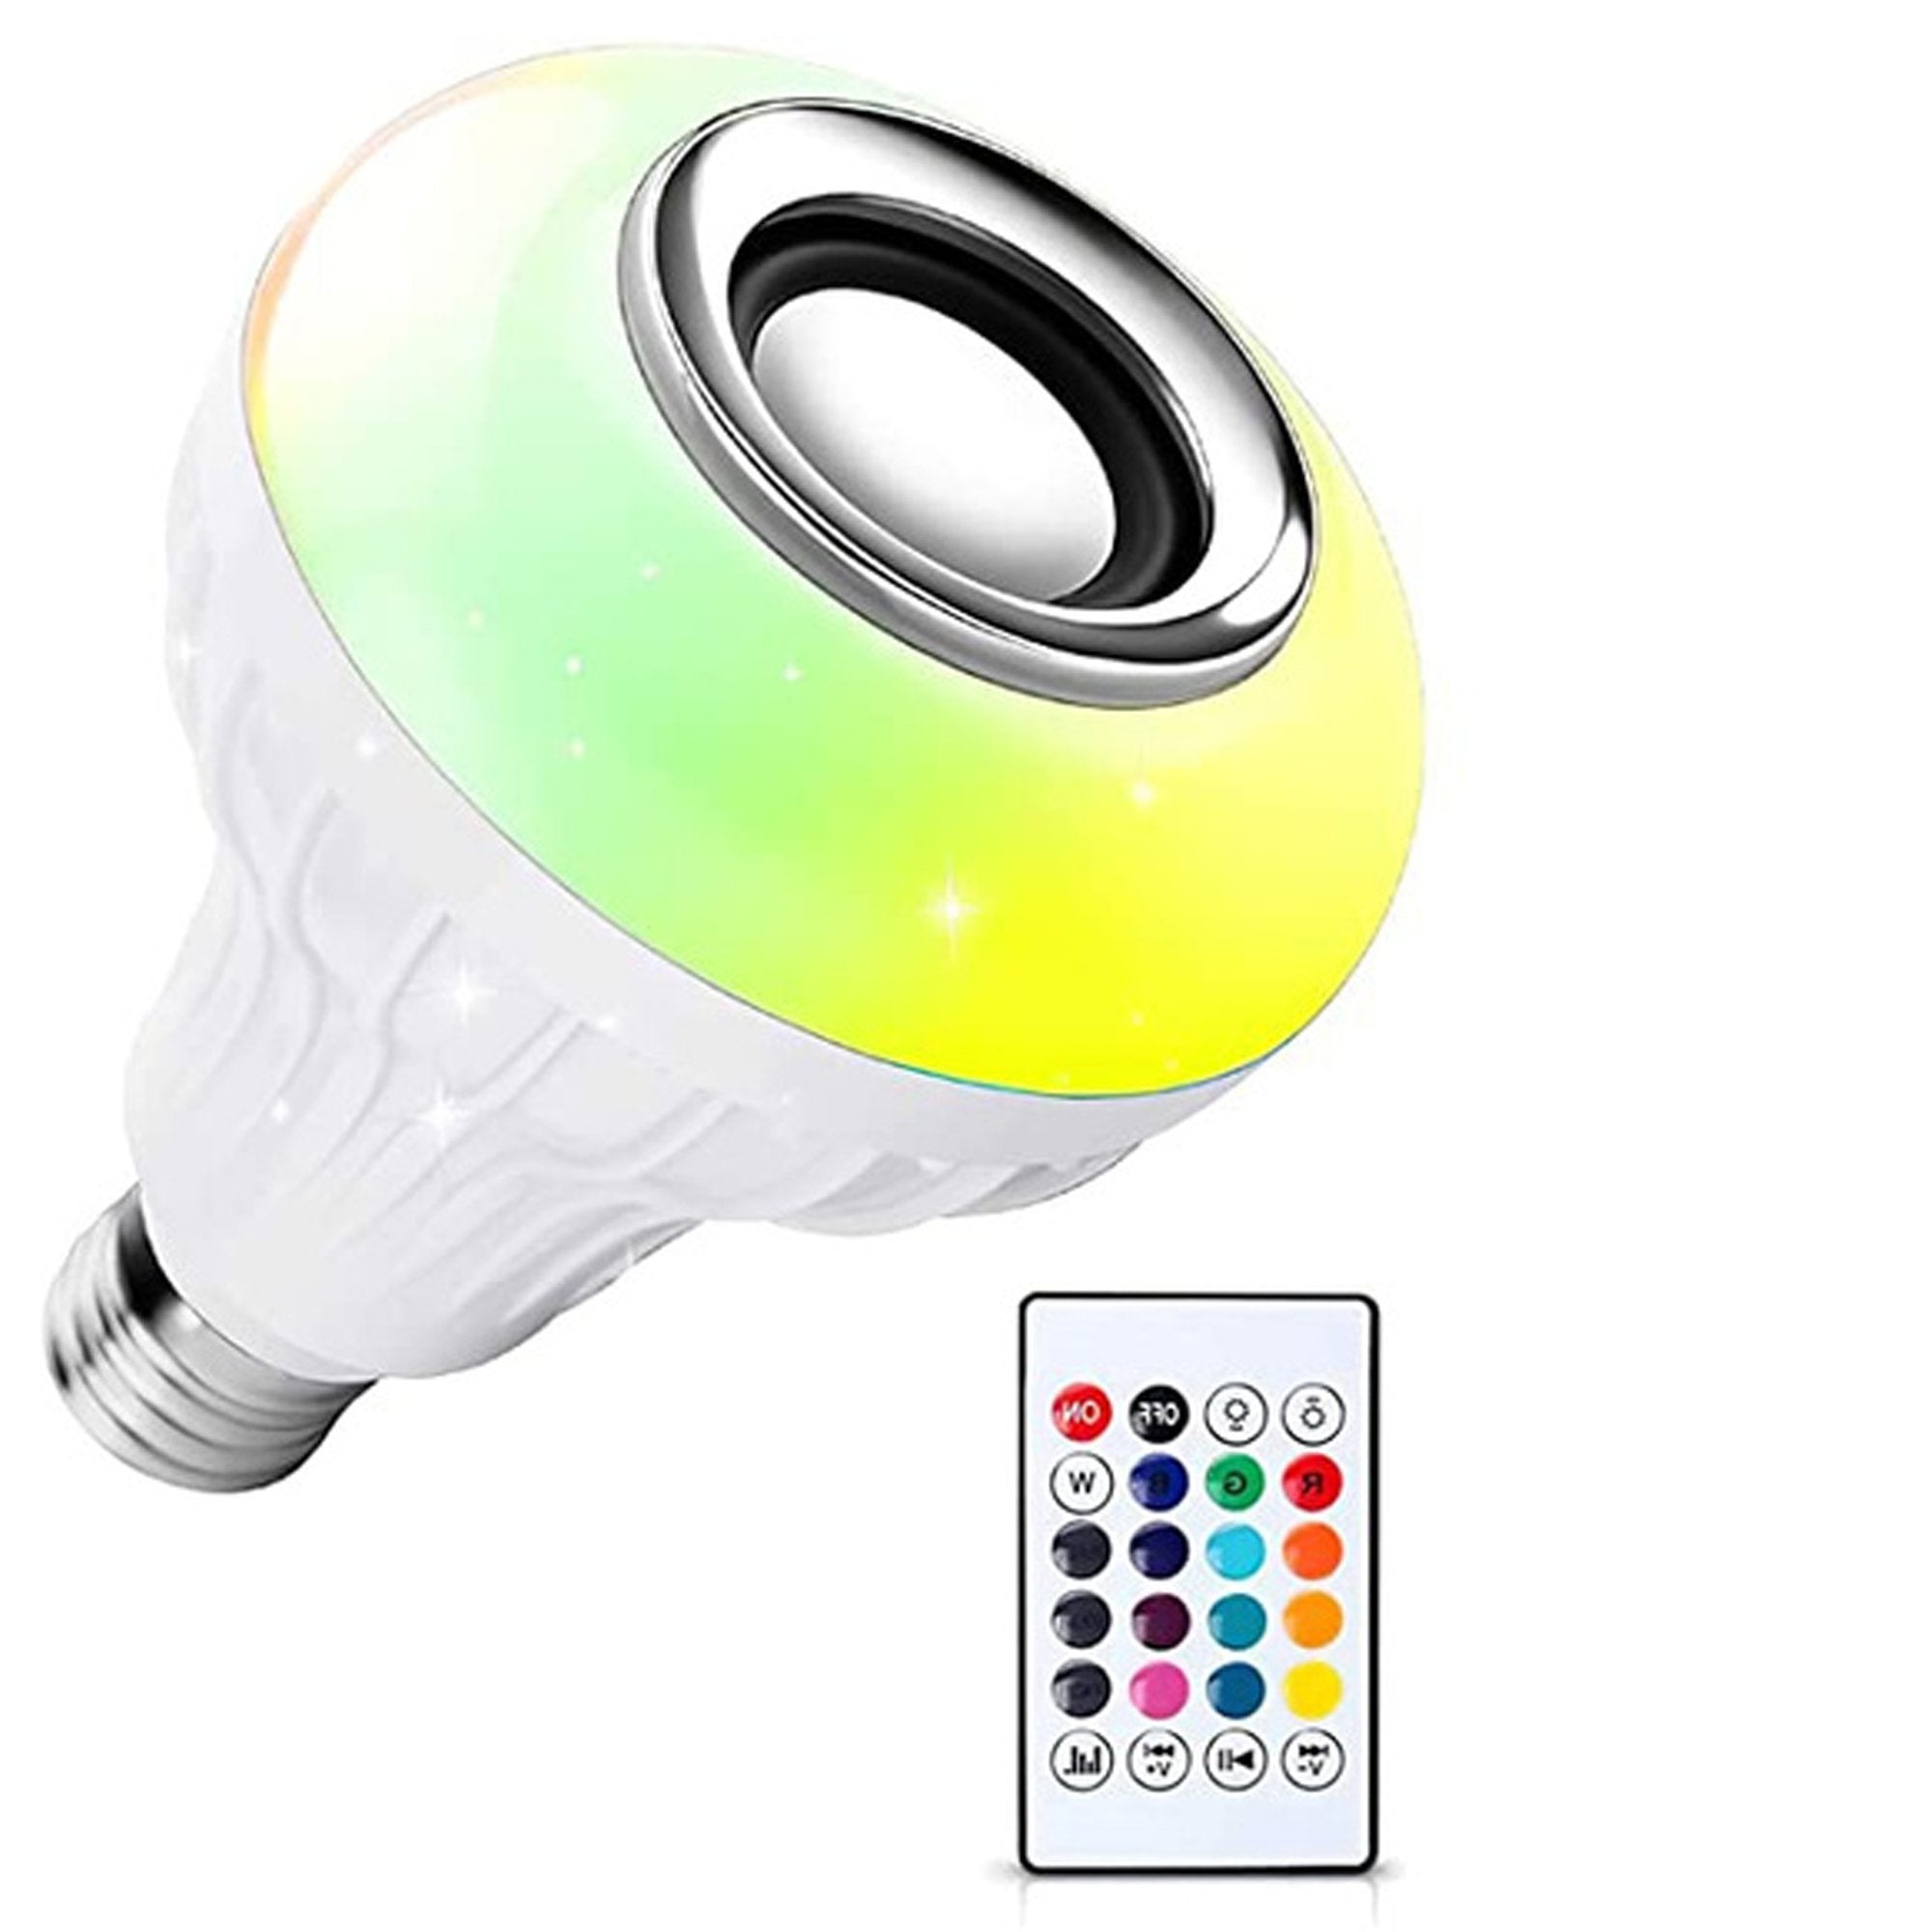 1363 Wireless Bluetooth Sensor 12W Music Multicolor LED Bulb with Remote Controller - SkyShopy